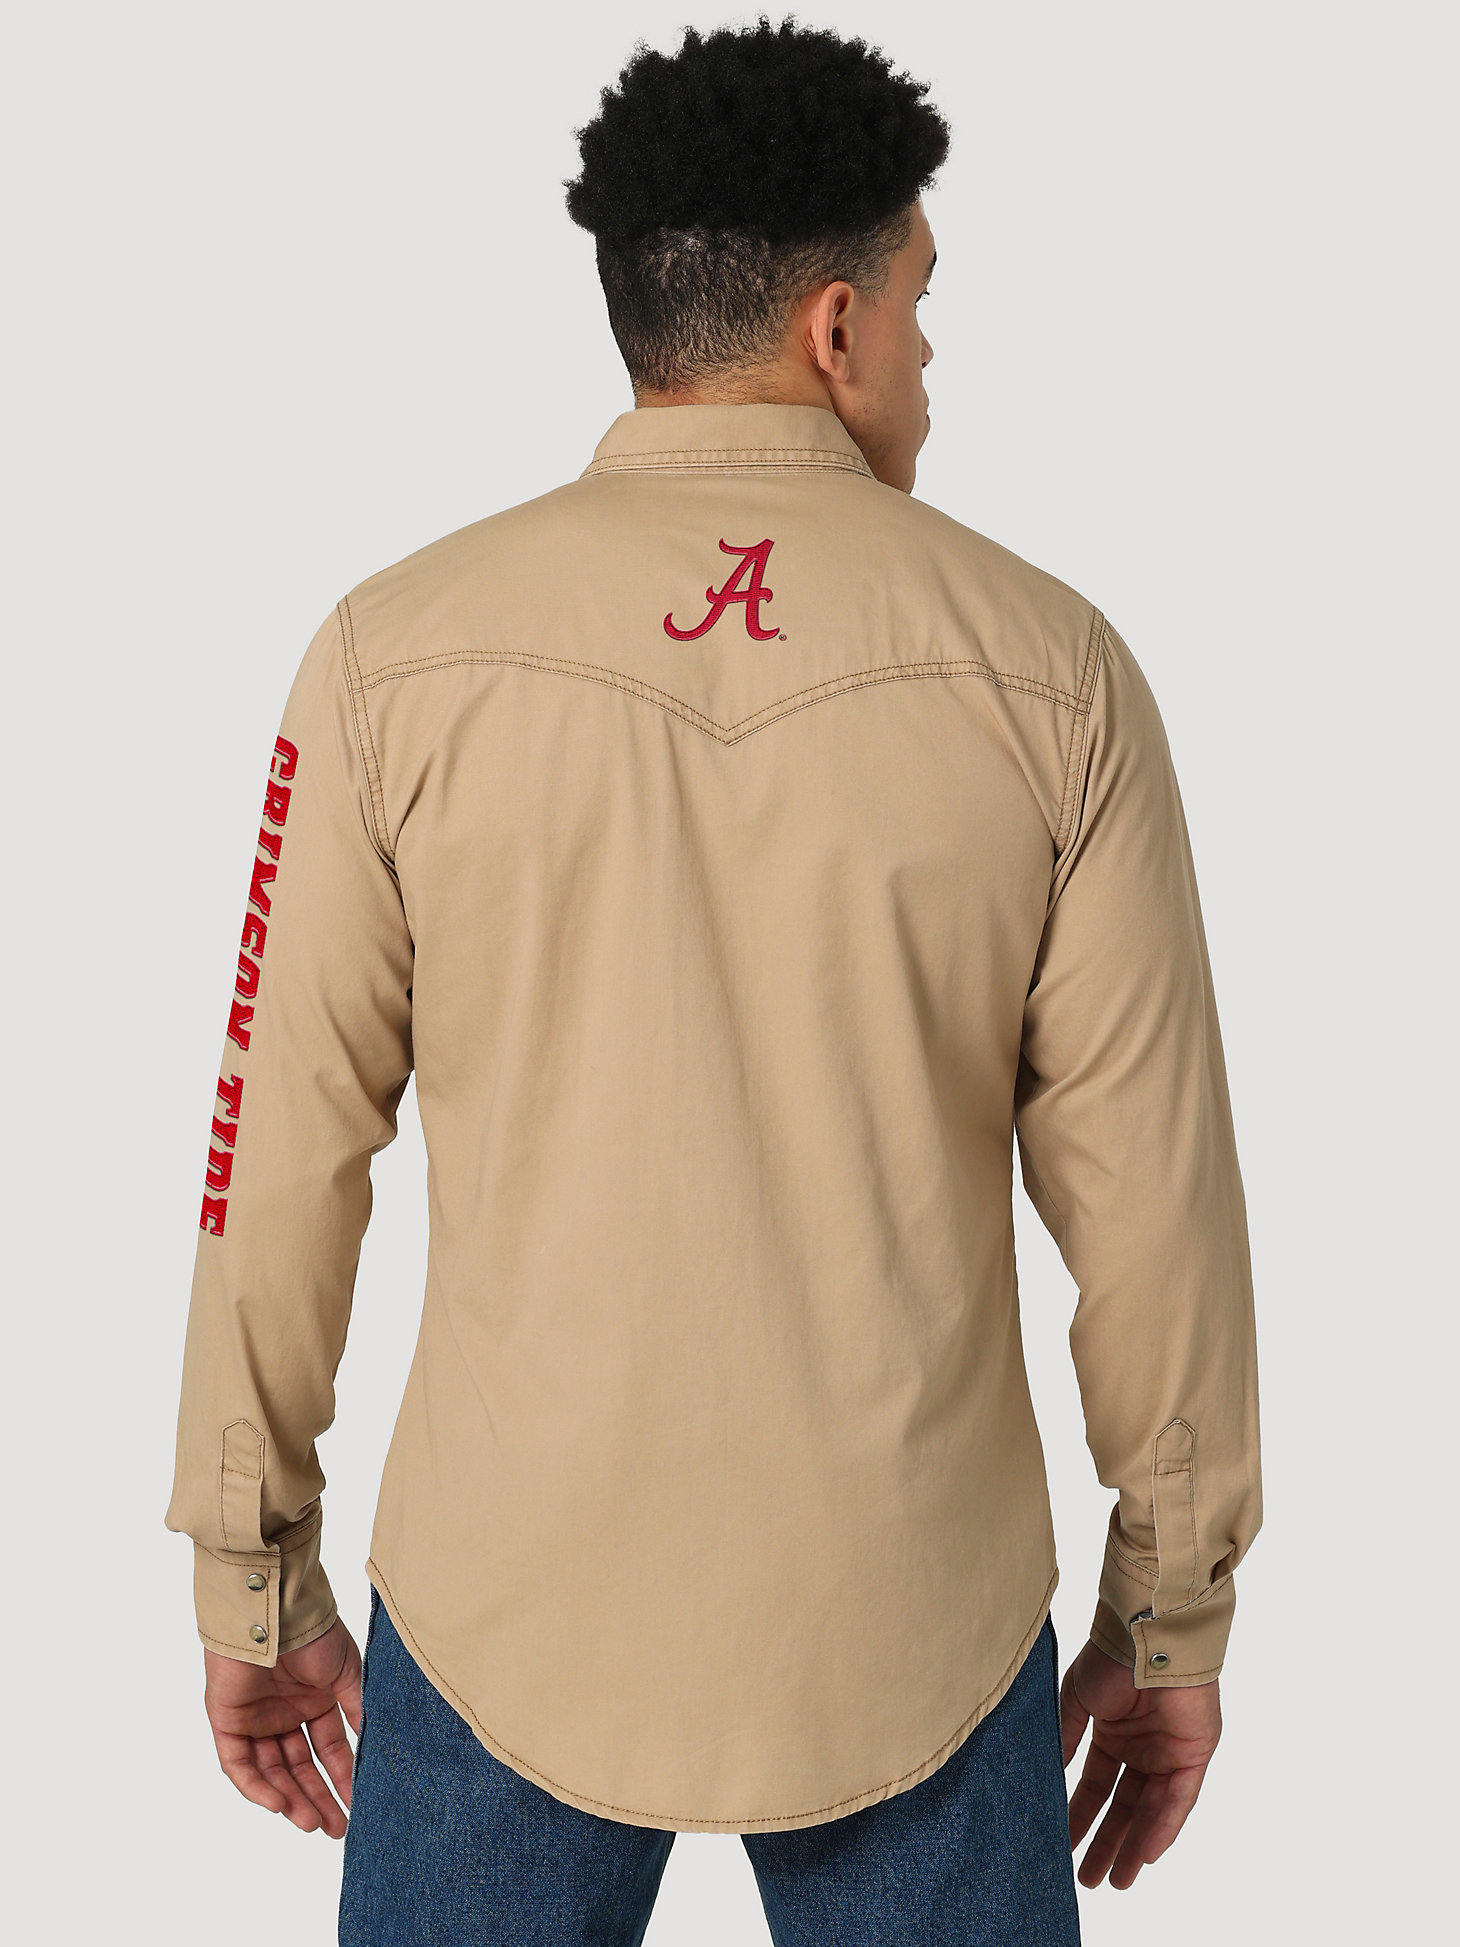 Wrangler Collegiate Embroidered Twill Western Snap Shirt in University of Alabama alternative view 3